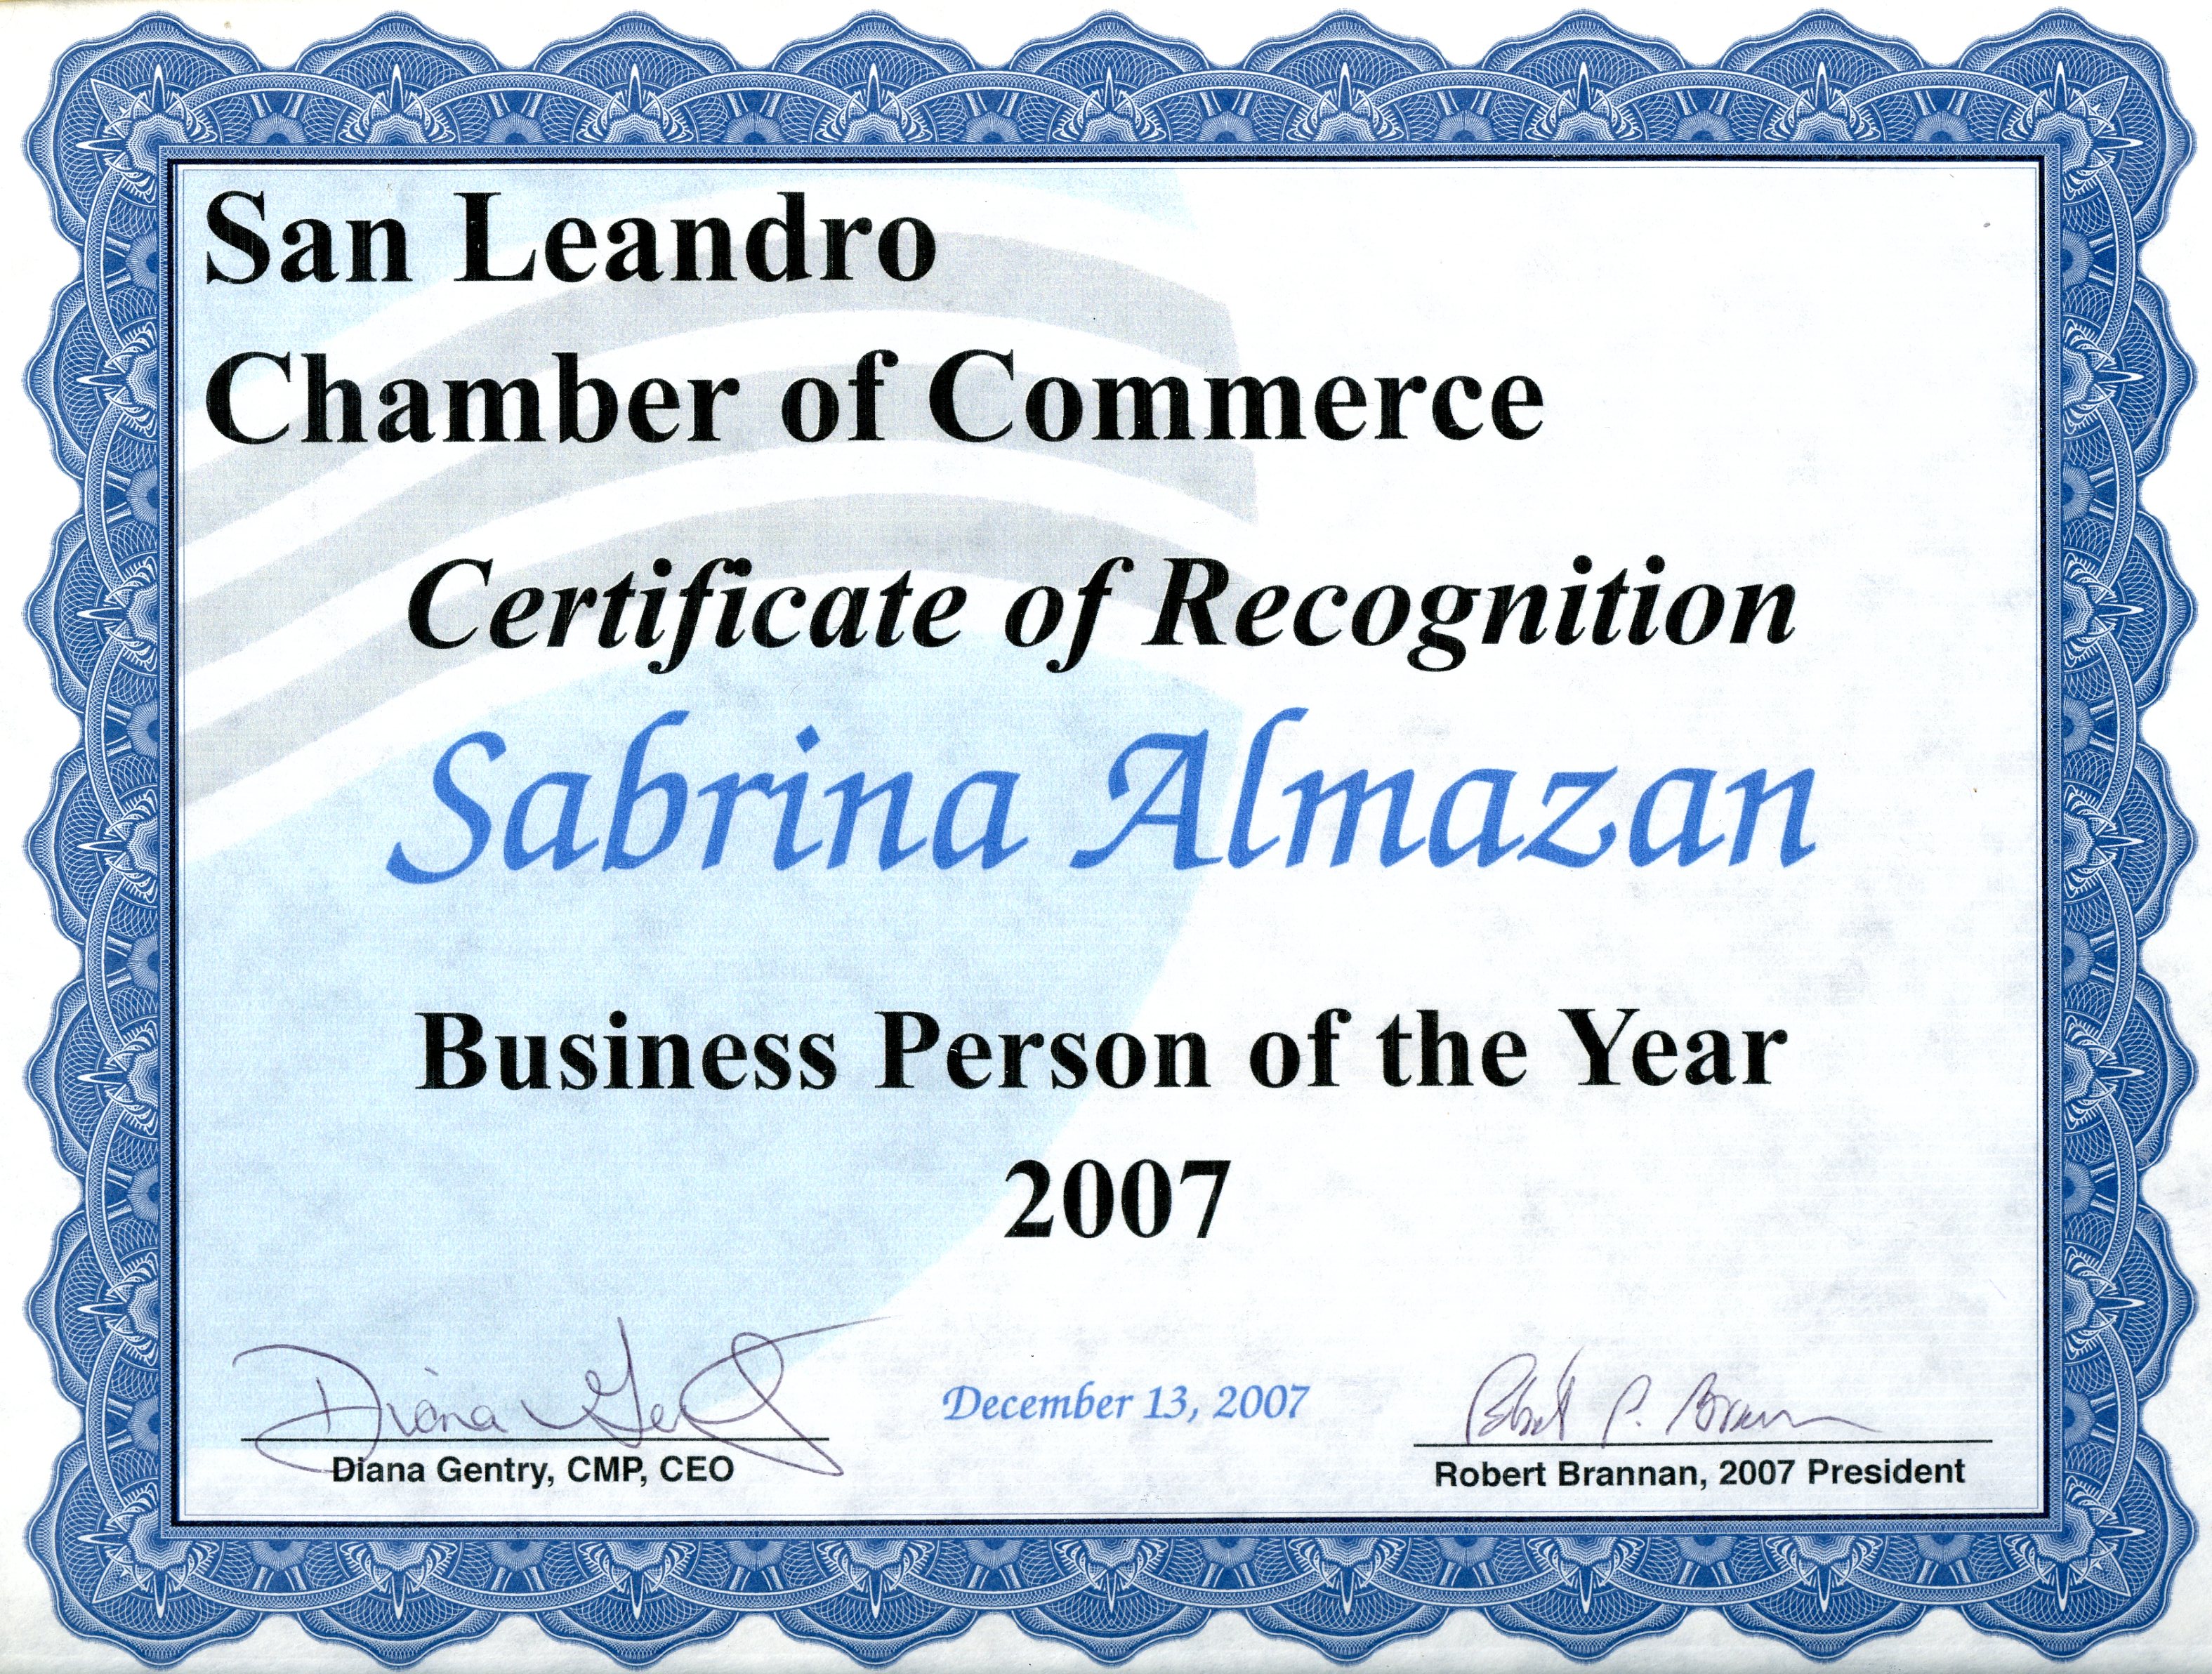 San Leandro Chamber of Commerce, Business Person of the Year 2007